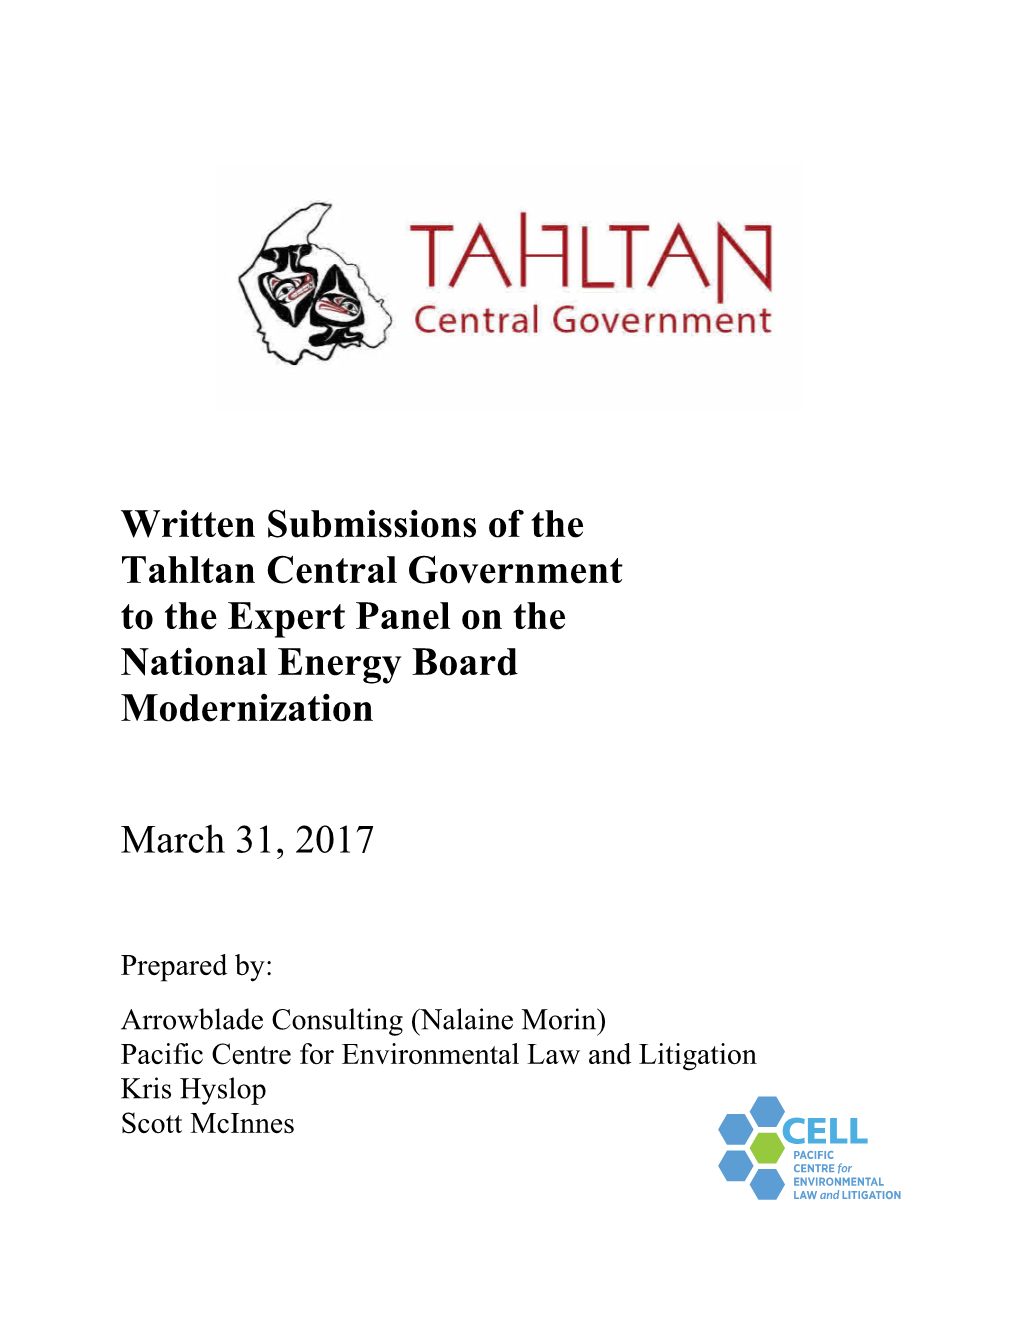 Written Submissions of the Tahltan Central Government to the Expert Panel on the National Energy Board Modernization